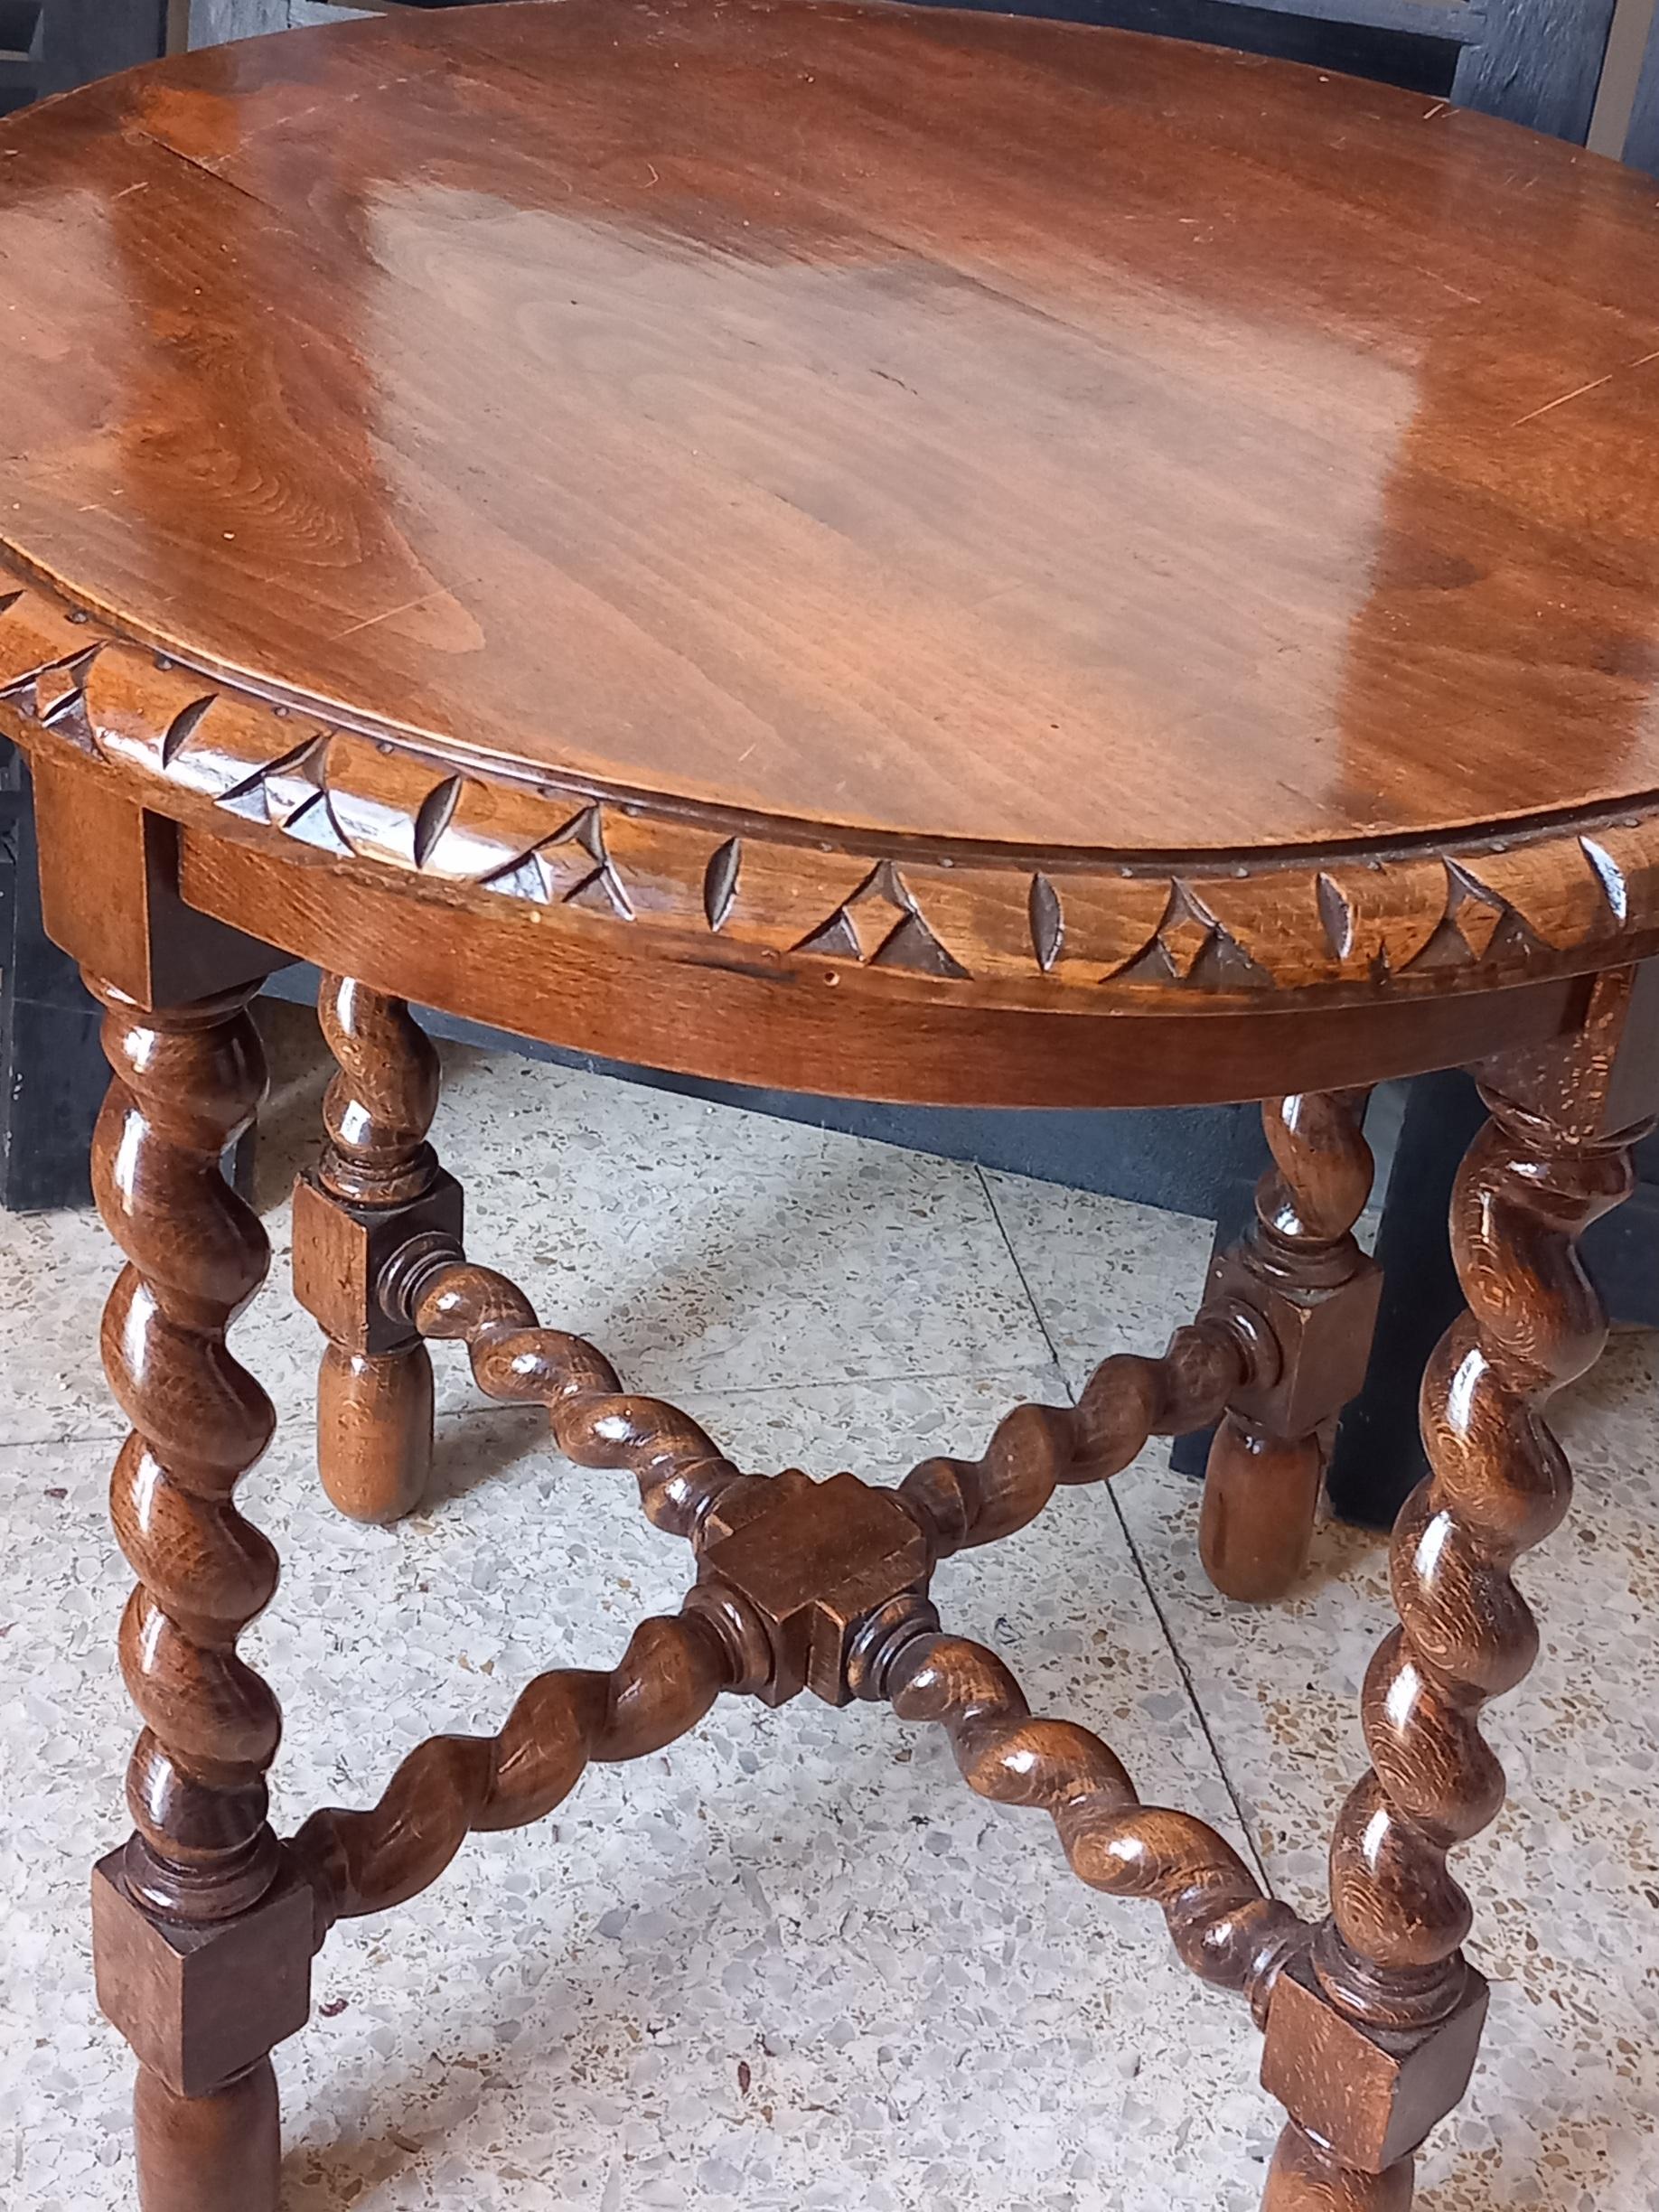 Beautiful  Side or end table, In perfect condition. Very well cared for

This table is raised on a base composed of four turned legs and a cross-shaped stretcher, also turned 

Lovely Round side table features barley twist legs, 19th Century

With